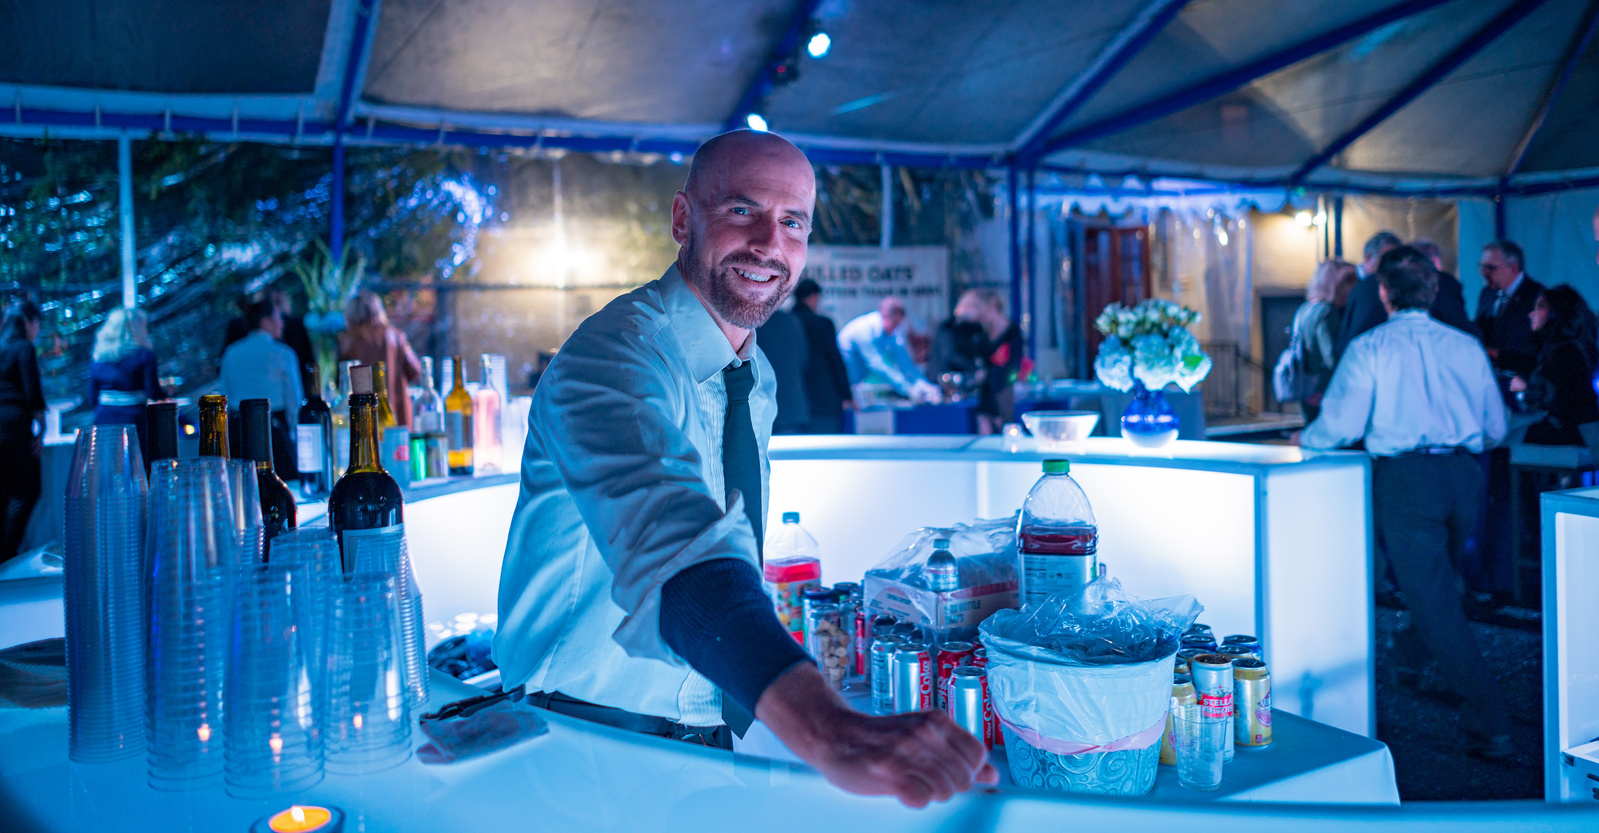 Bartender at diplomatic event in Scotland- Photography by Nate Cleary